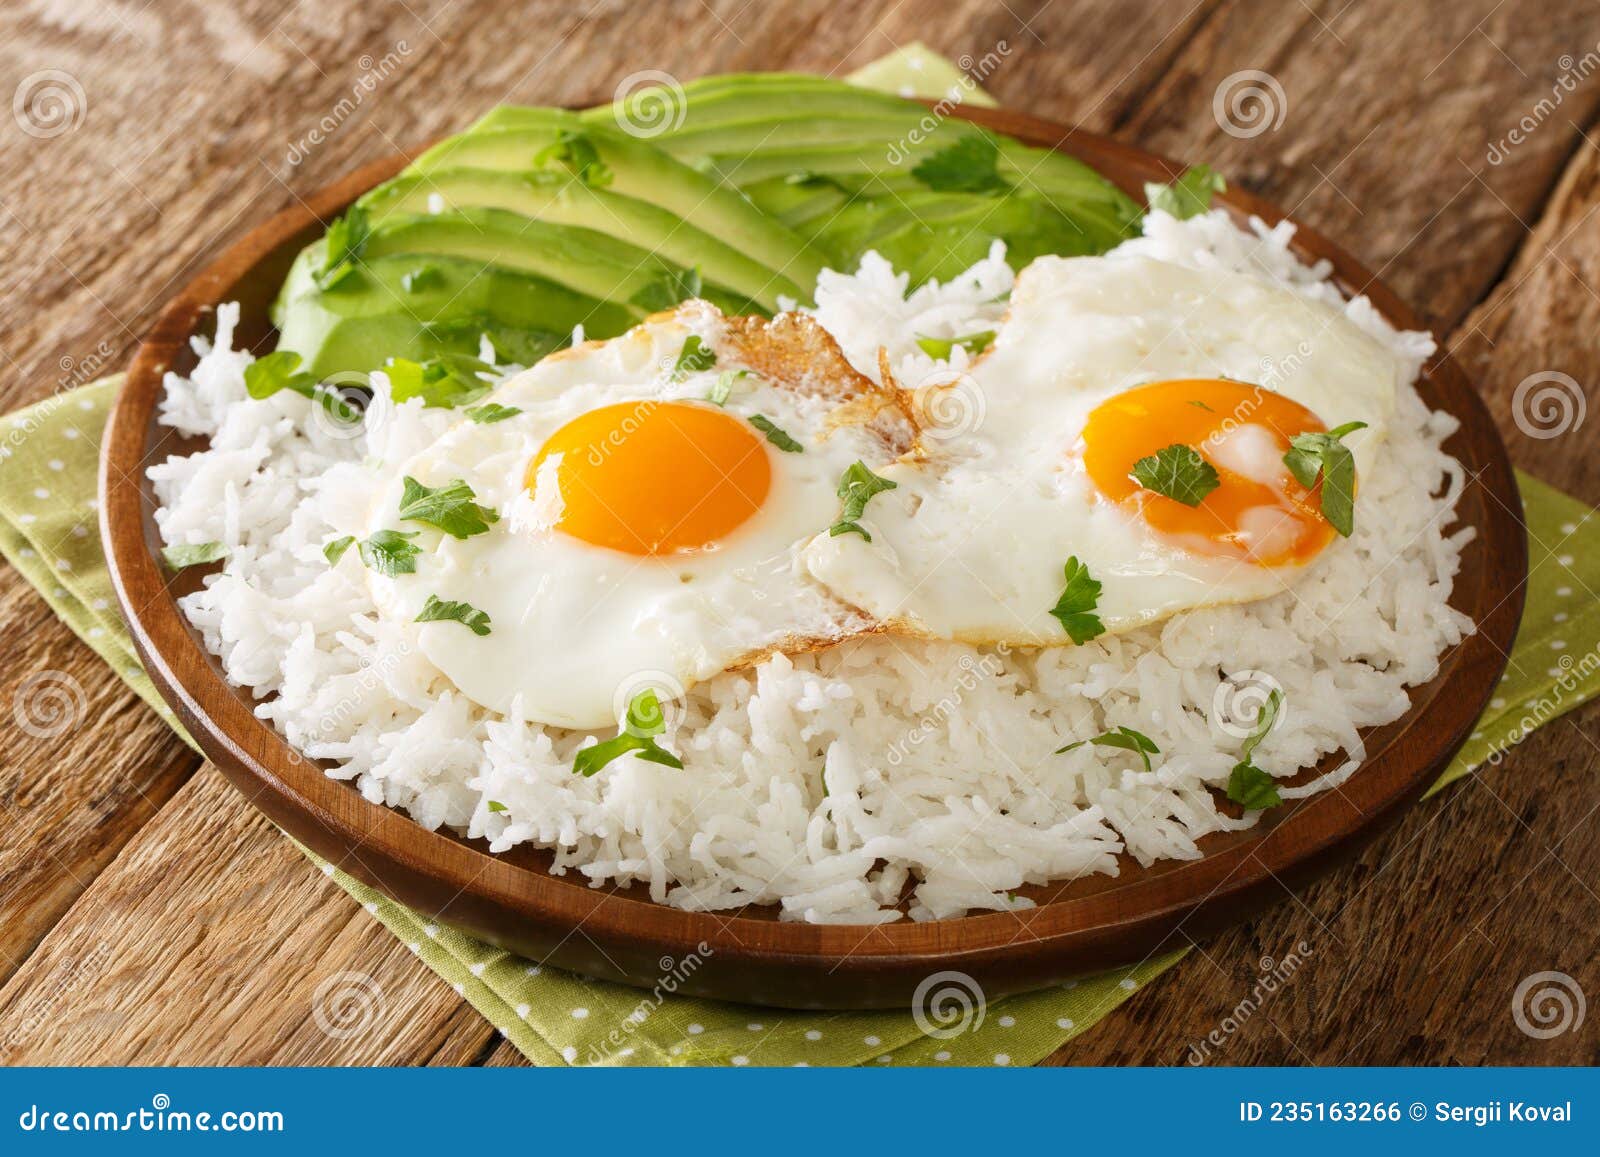 arroz con huevo is a popular lazy lunch throughout latin america, consisting of rice thatÃ¢â¬â¢s topped with a fried egg close up in